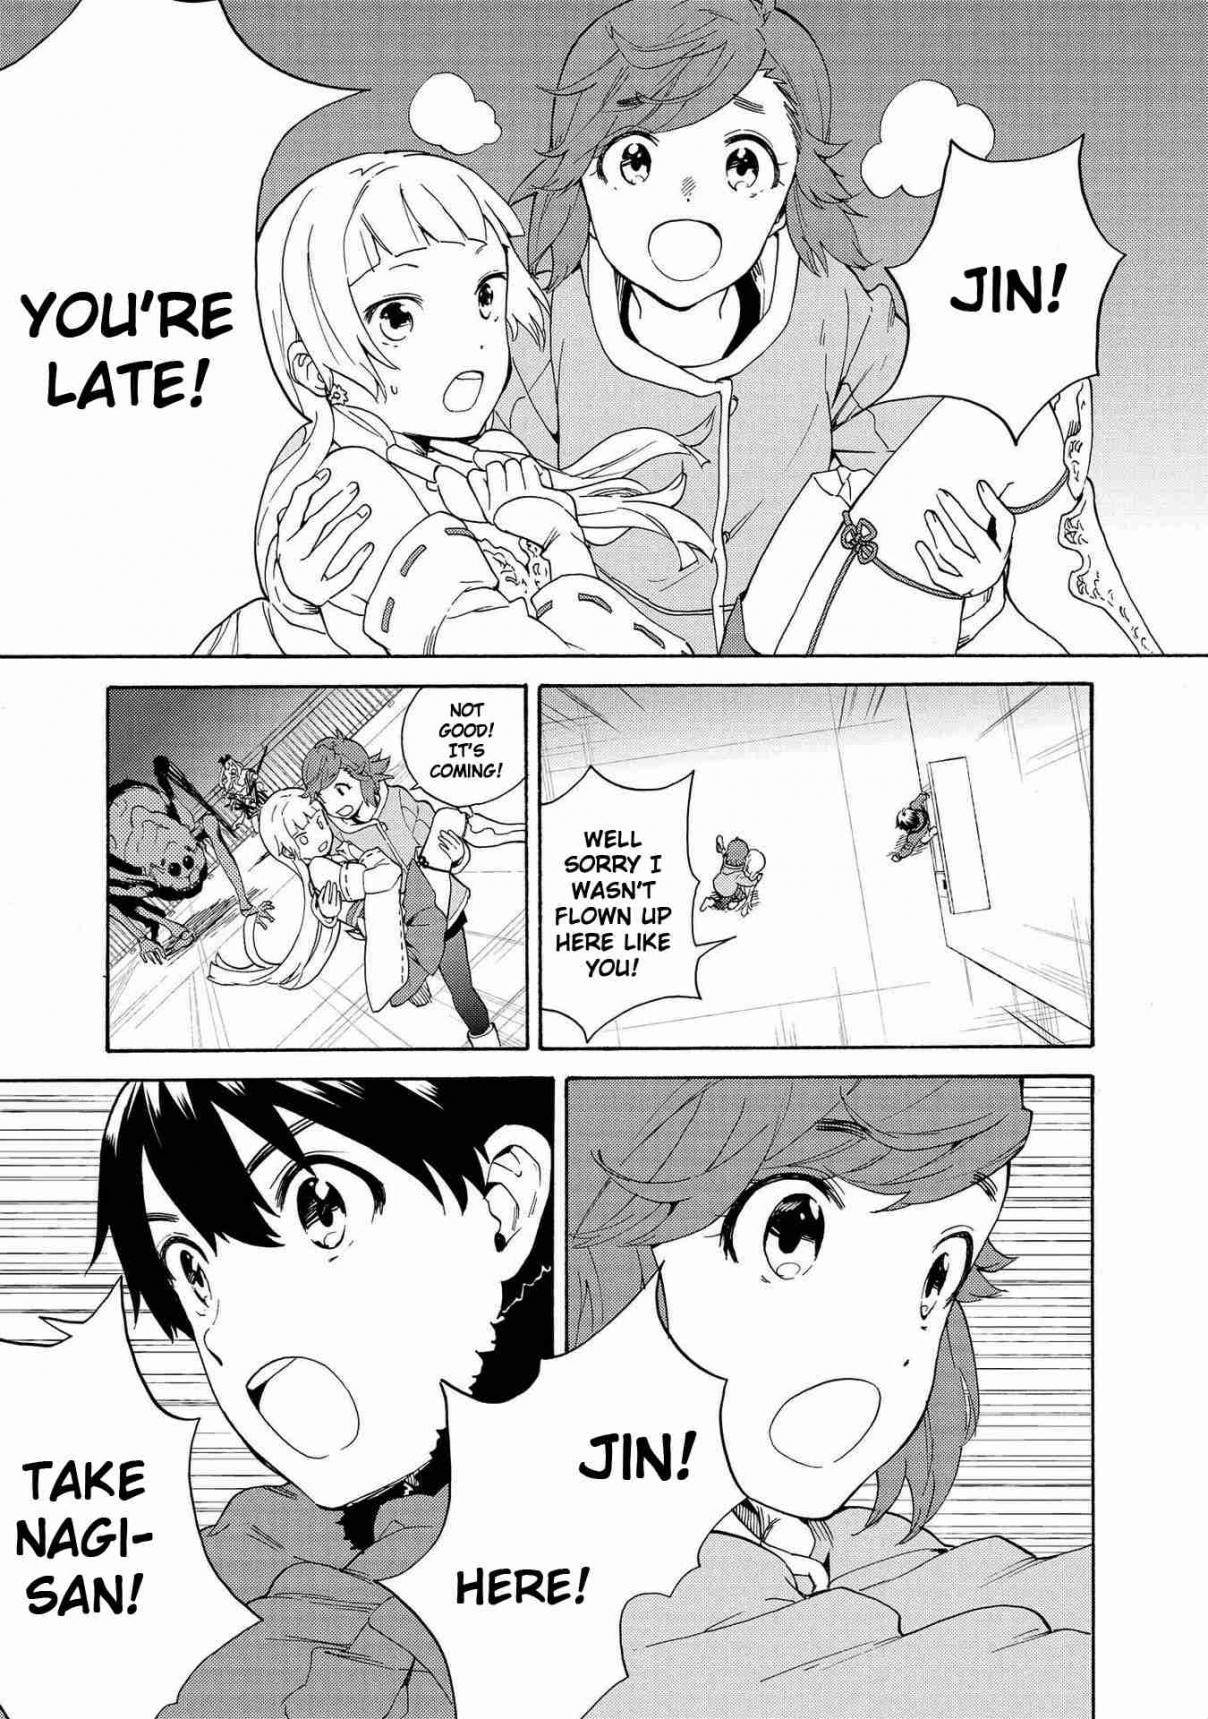 Kannagi Vol. 12 Ch. 72 Confession After Confession of the Confession